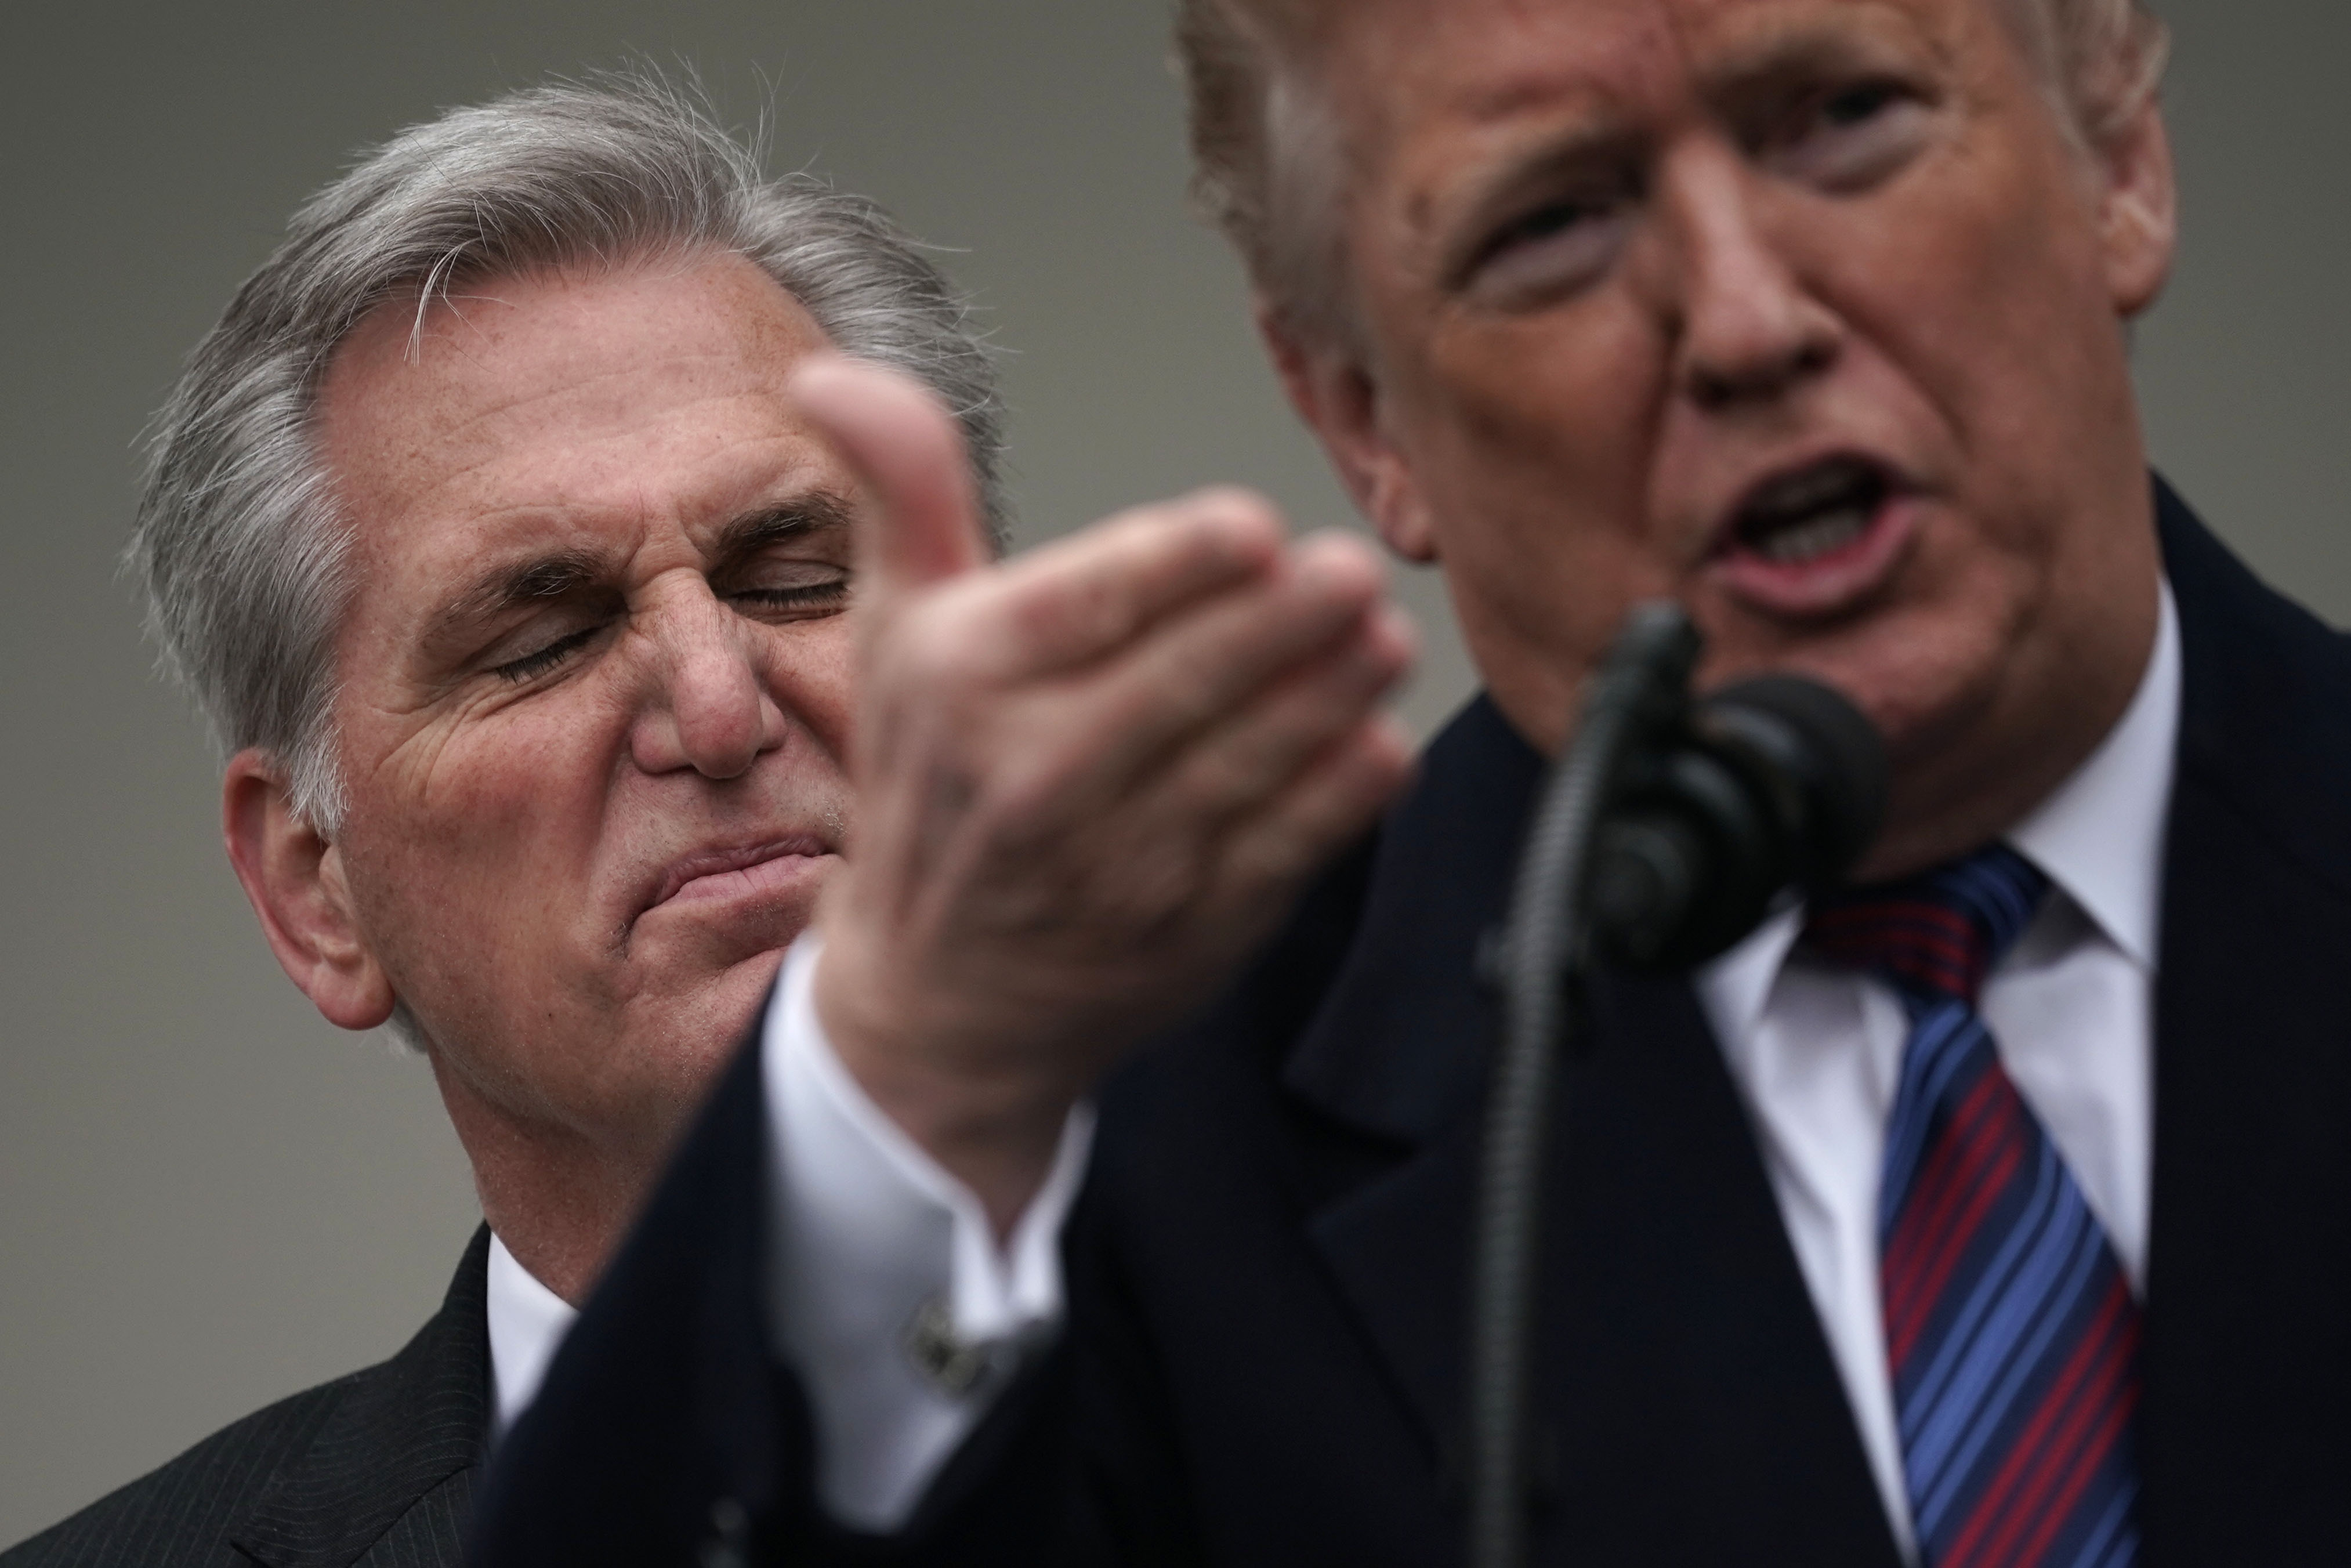 U.S. President Donald Trump (R) speaks as he joined by Rep. Kevin McCarthy (L) in the Rose Garden of the White House on January 4, 2019 in Washington, DC. Trump hosted both Democratic and Republican lawmakers at the White House for the second meeting in three days as the government shutdown heads into its third week. (Photo by Alex Wong/Getty Images)